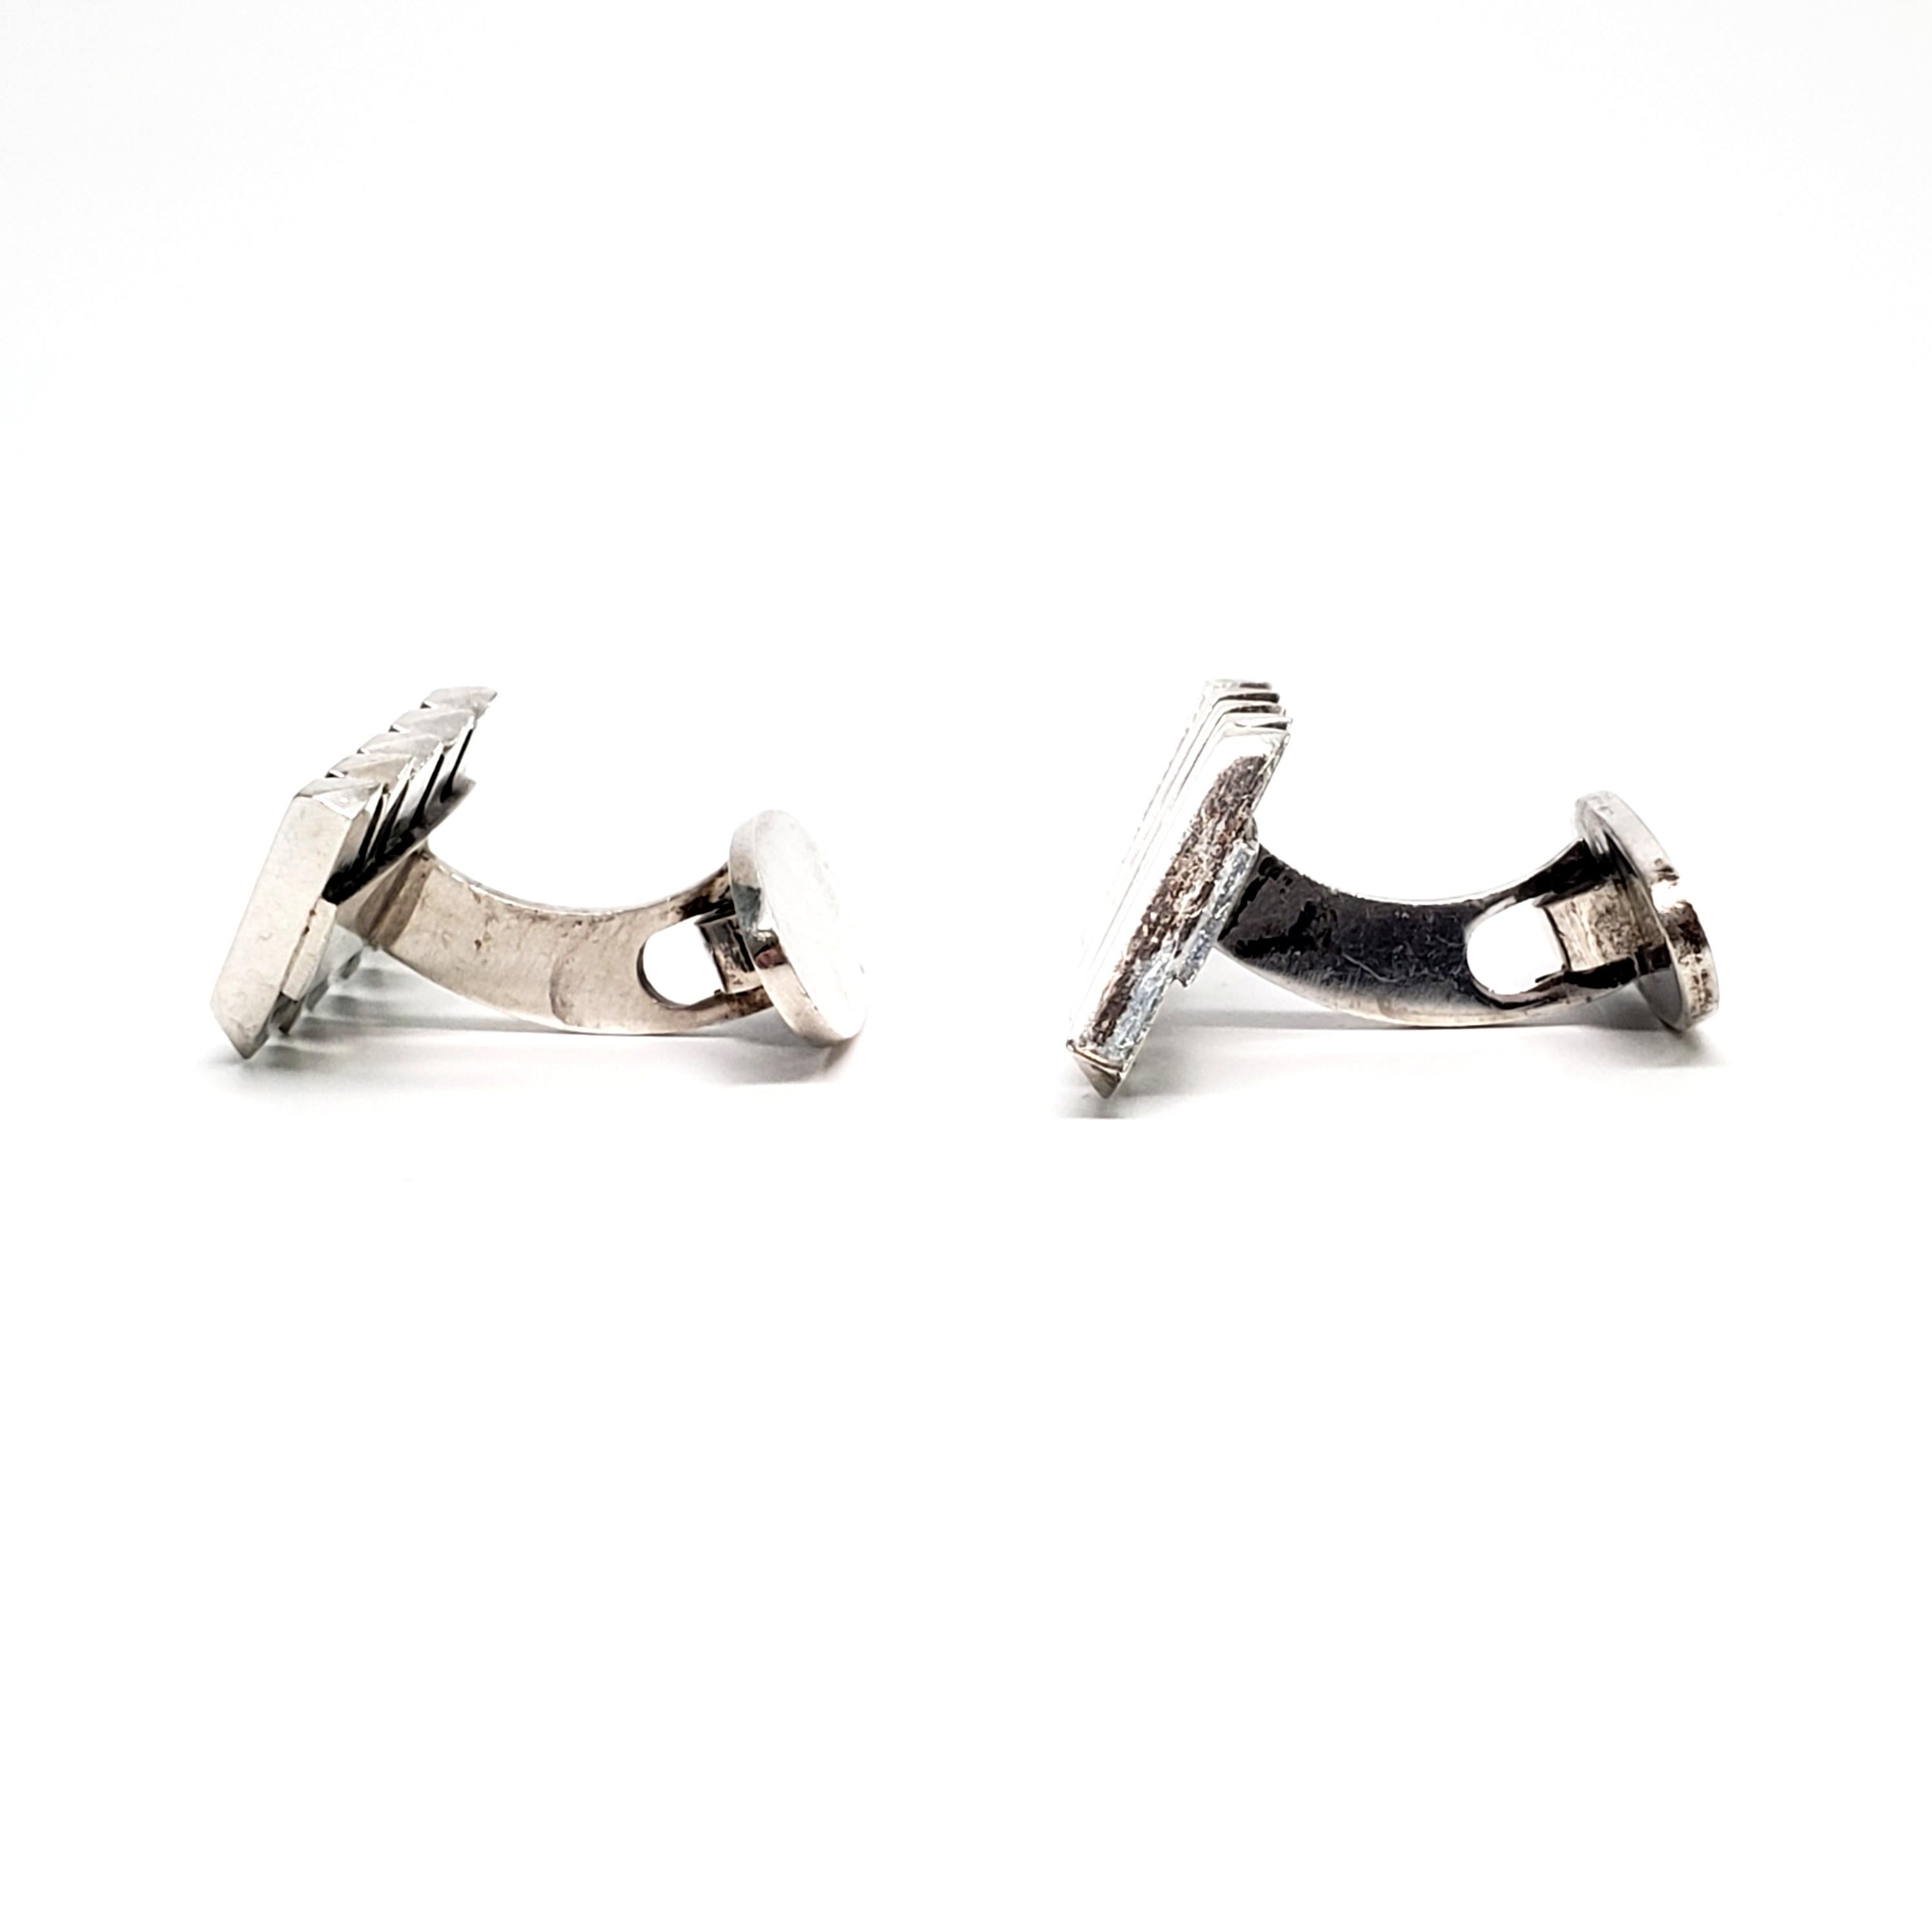 Vintage sterling silver cuff links by Willy Jacob Krogmar.

Exceptional example of Krogmar's mid-century modern Danish design.

Measures 1 1/8